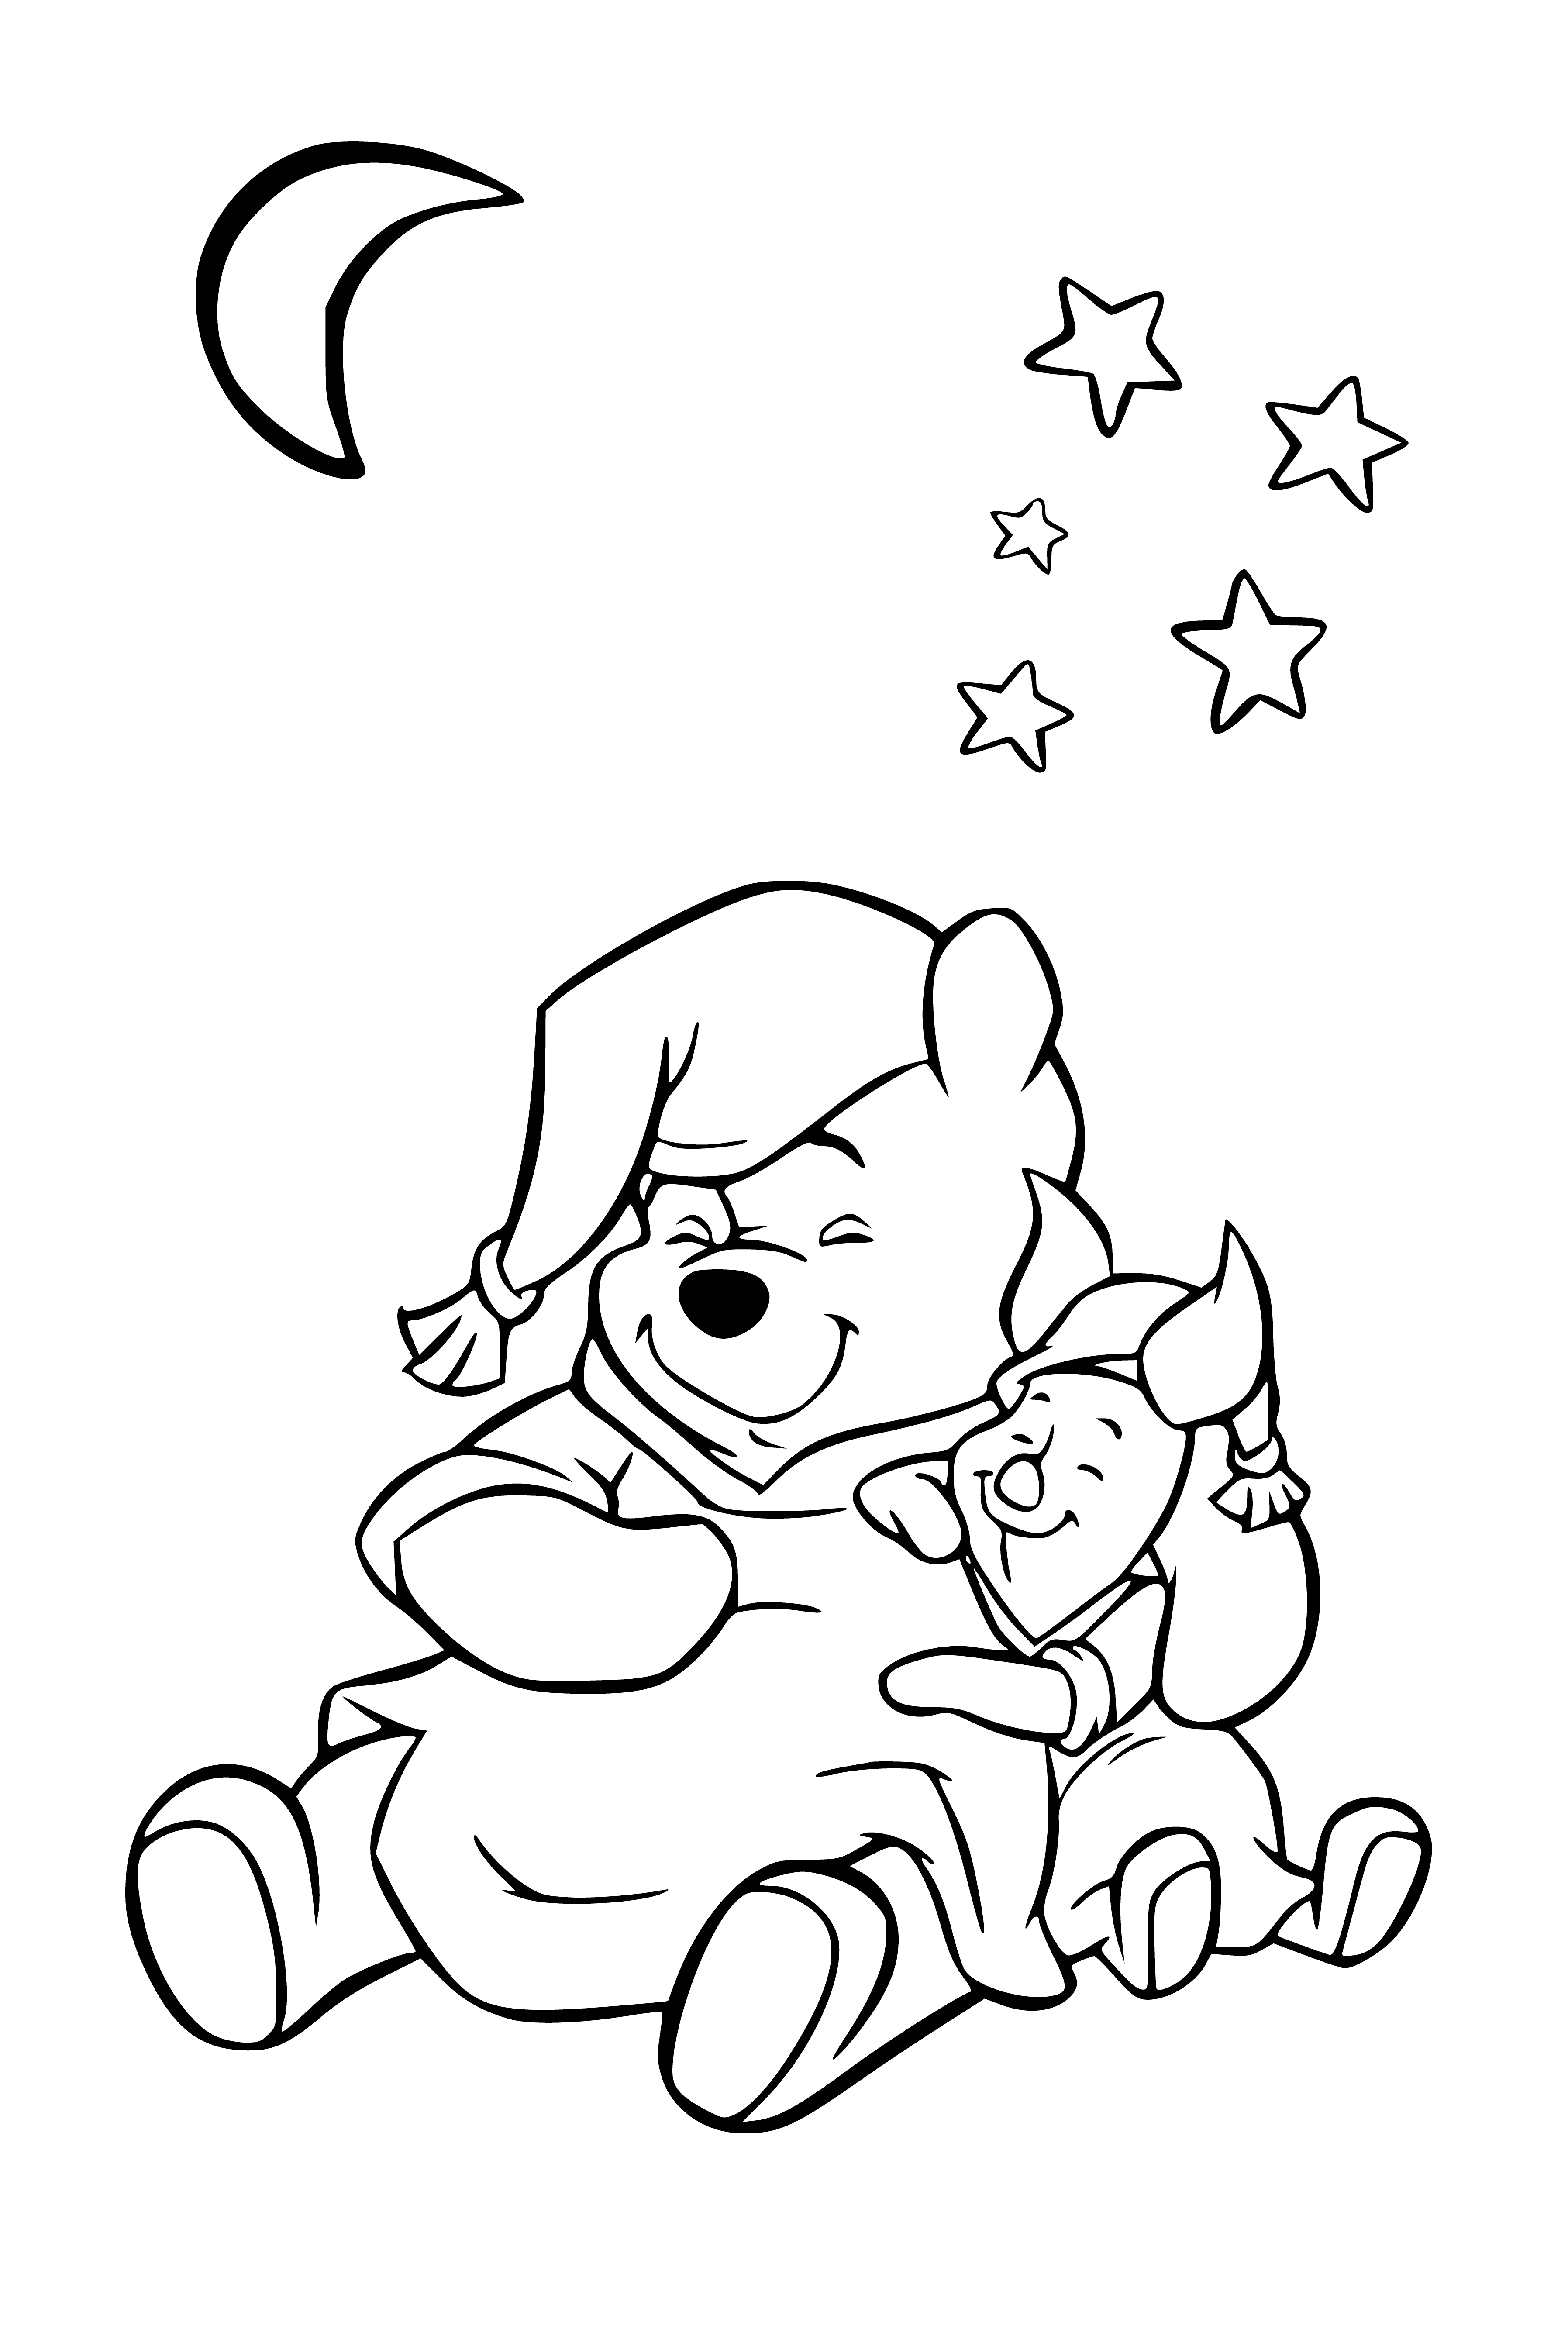 coloring page: Two characters in coloring page - Winnie the Pooh - holding honey and spoon, smiling; Piggy looking worried.